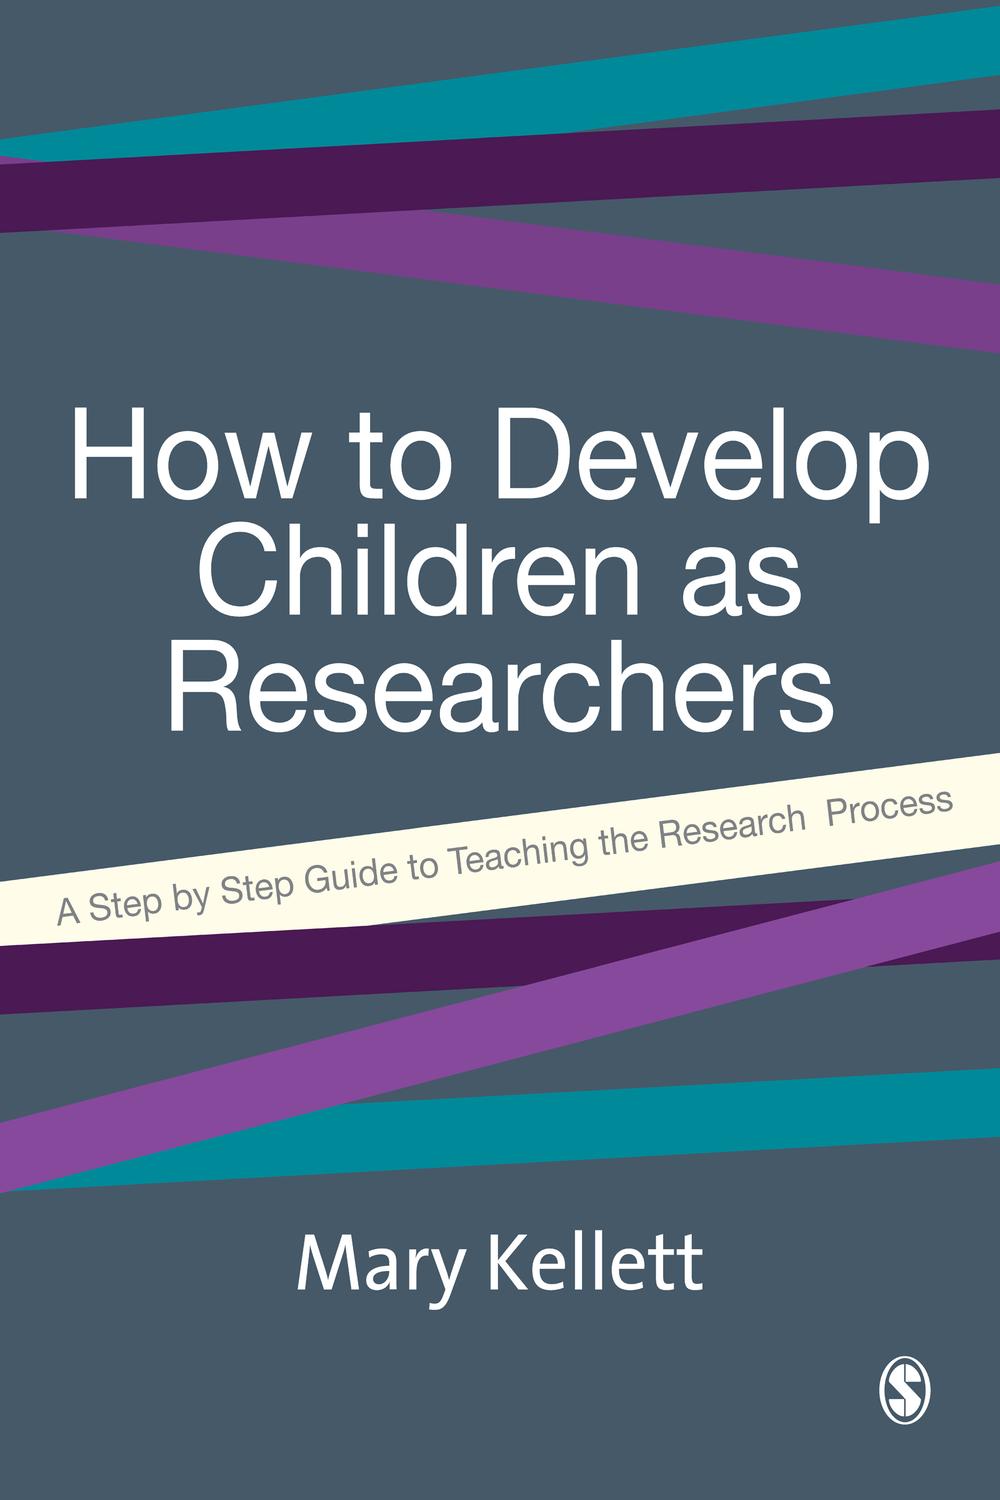 How to Develop Children as Researchers - Mary Kellett